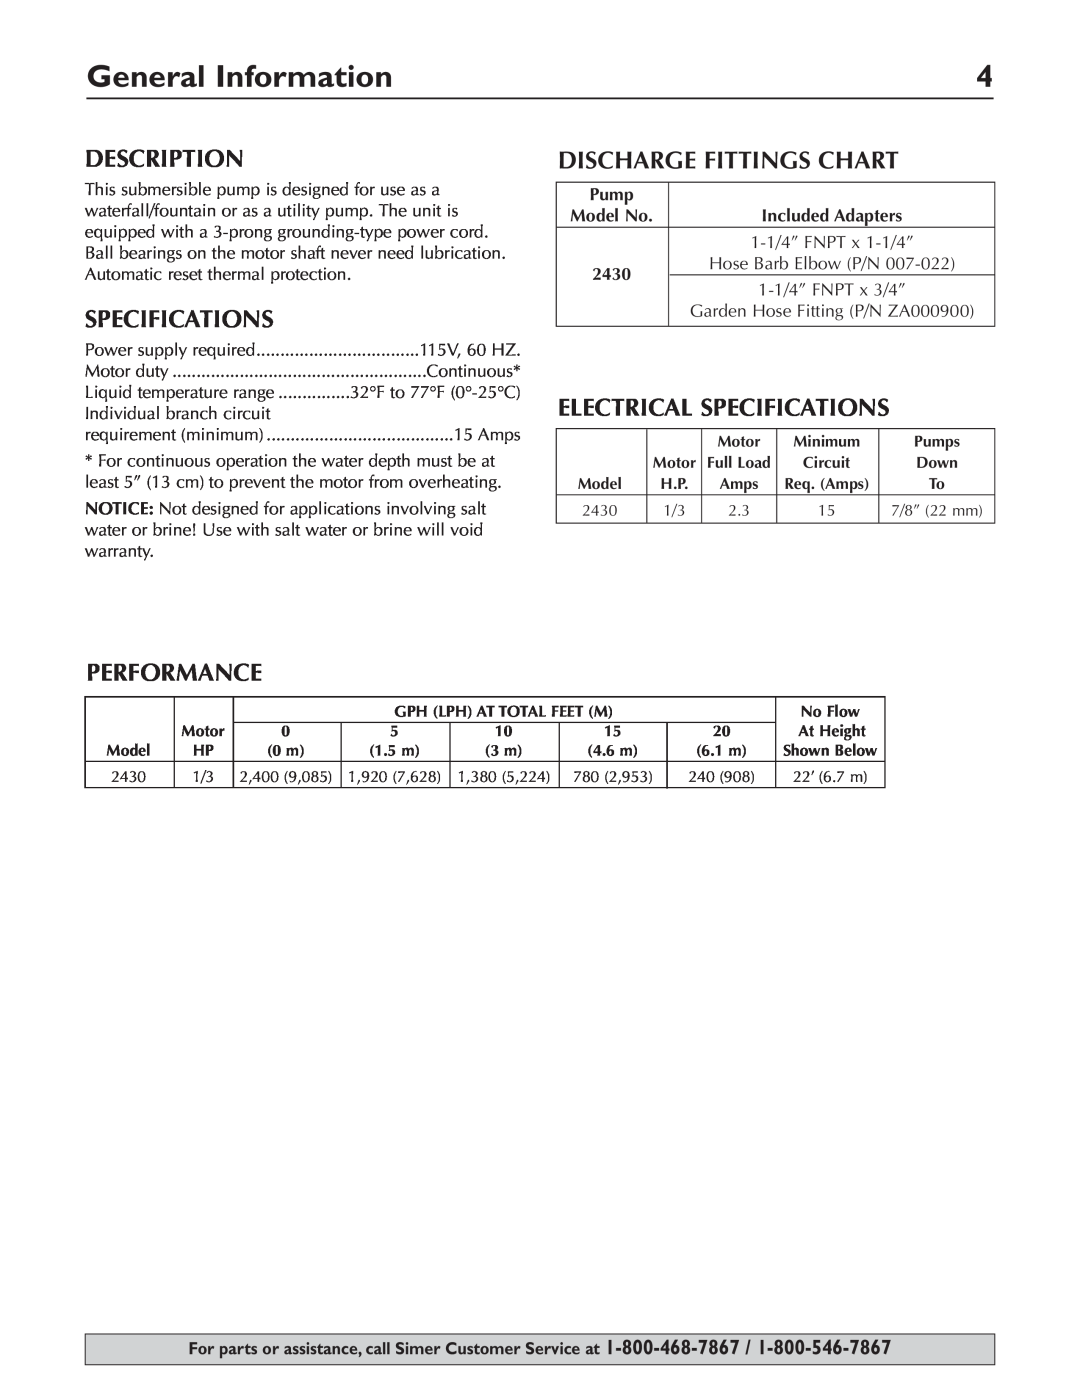 Simer Pumps 2430 General Information, Description, Discharge Fittings Chart, Electrical Specifications, Performance 